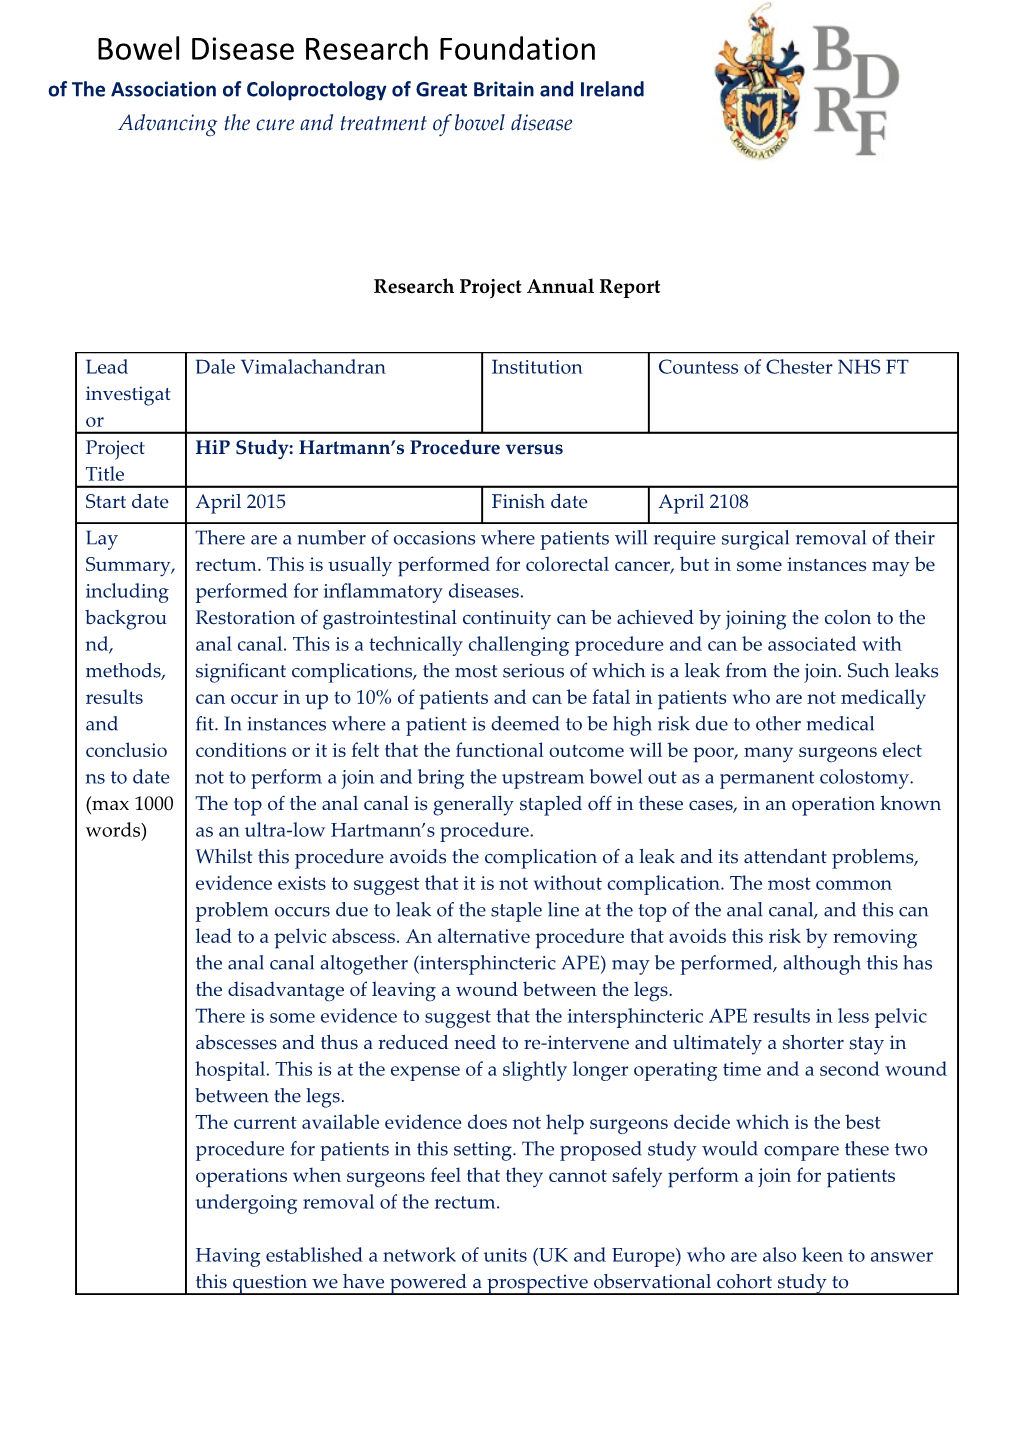 Research Project Annual Report s2